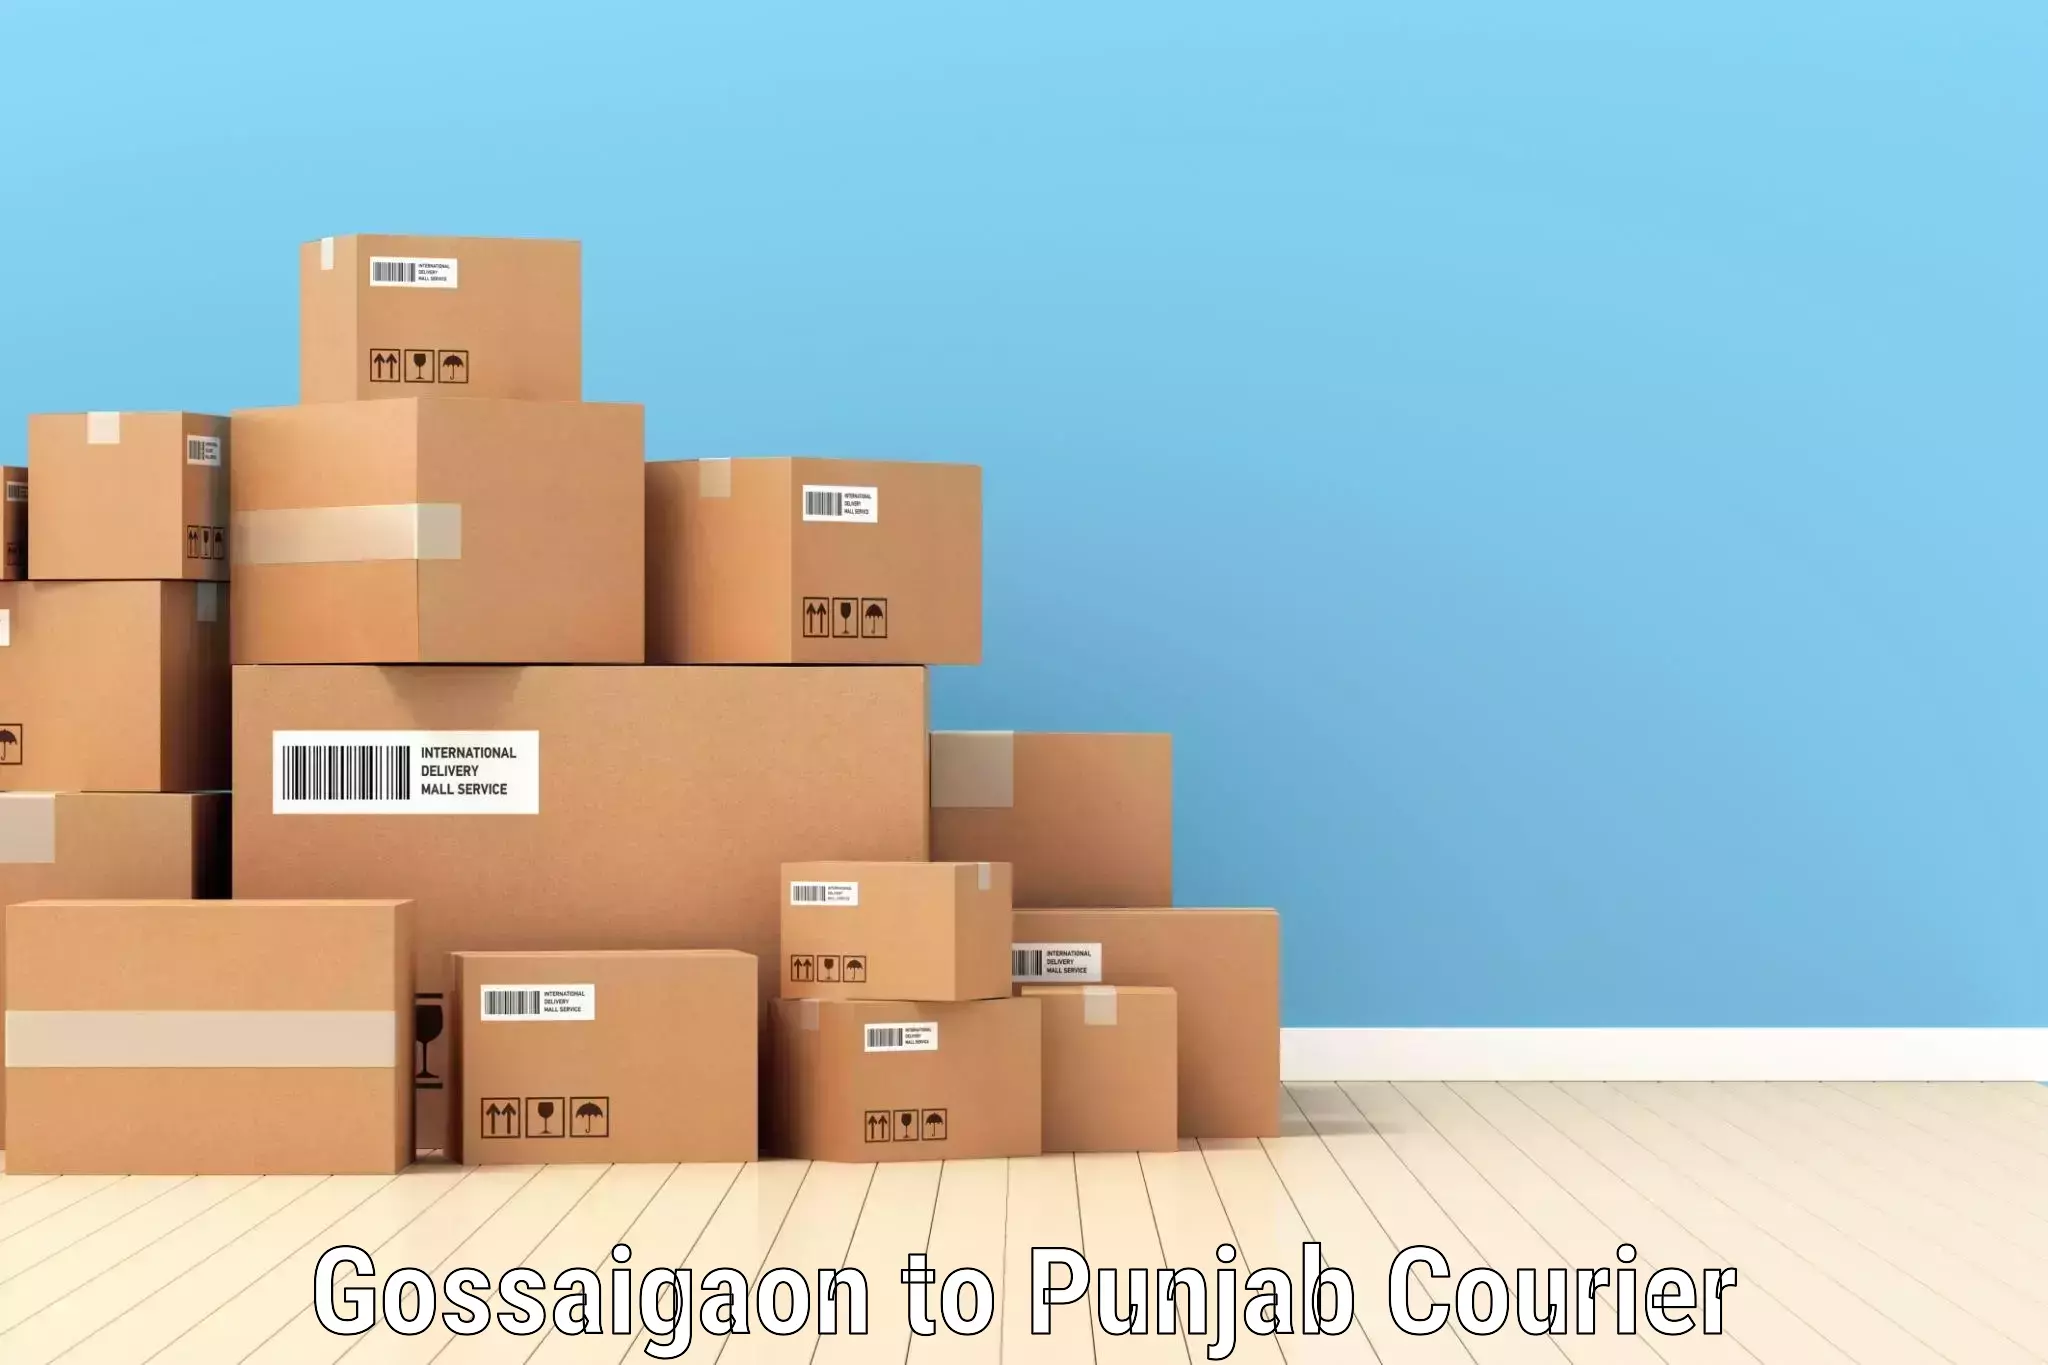 State-of-the-art courier technology Gossaigaon to Mohali